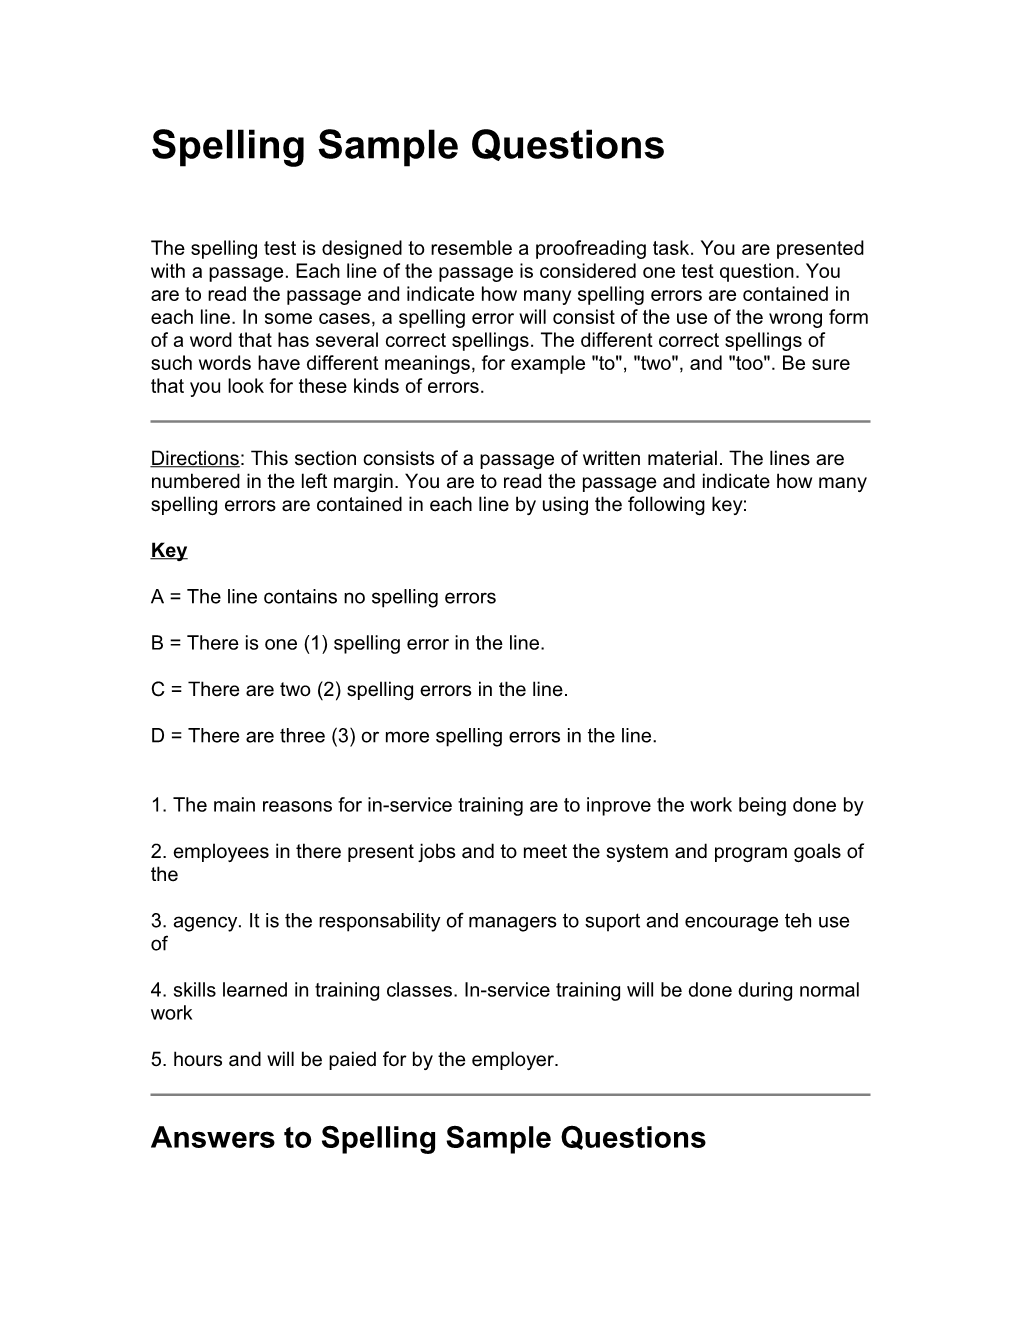 Spelling Sample Questions